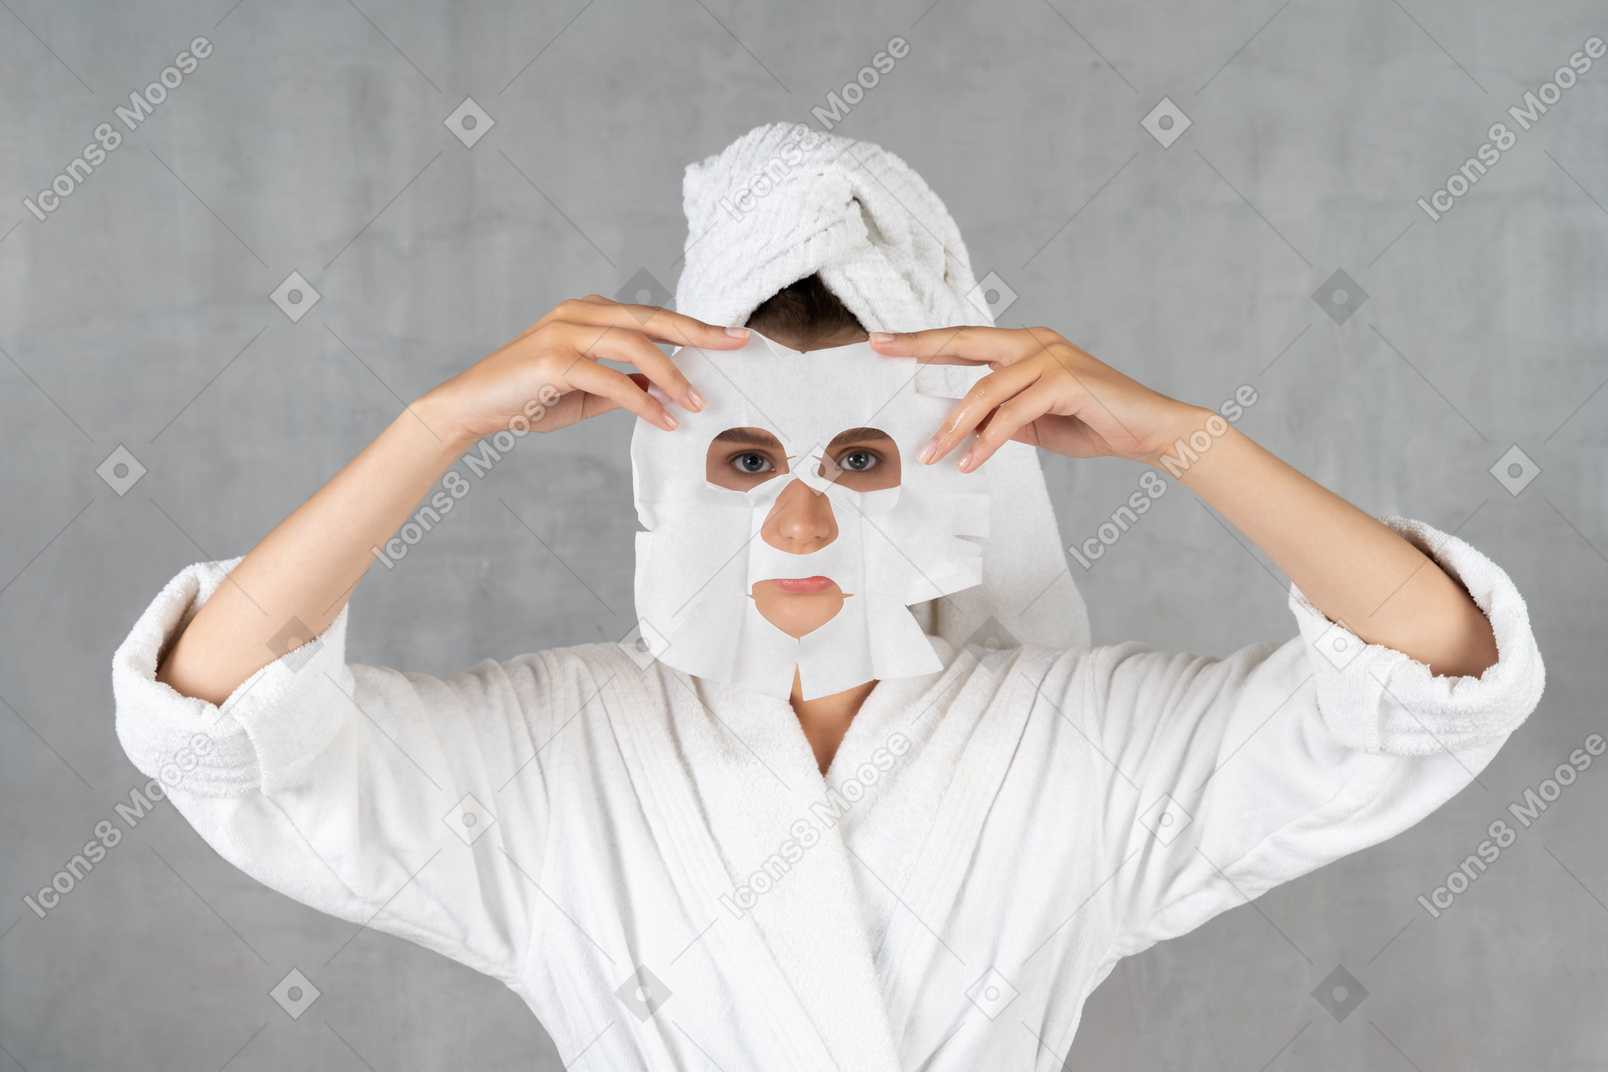 Woman in bathrobe holding a sheet mask over face